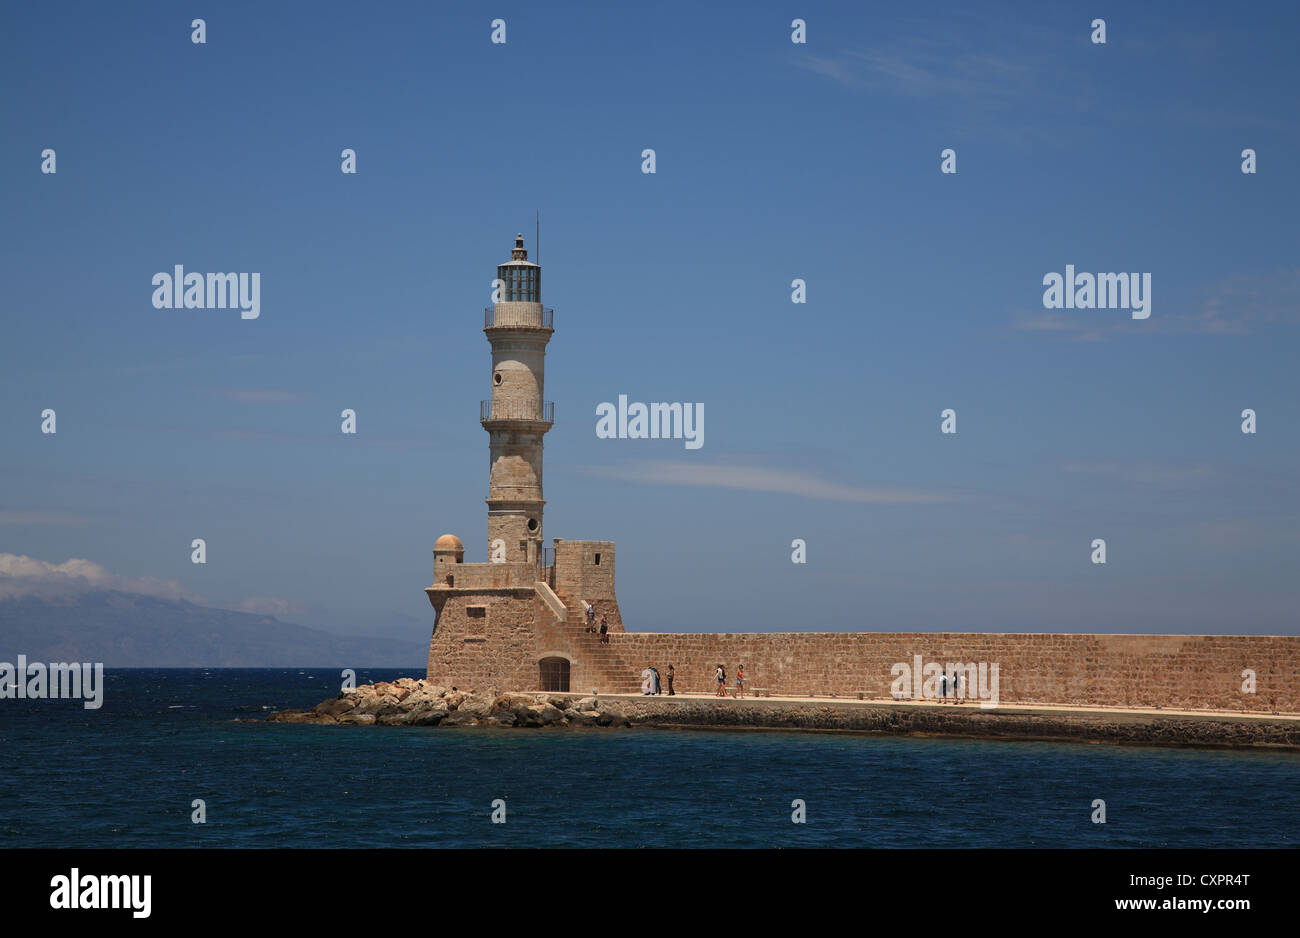 Venetian Lighthouse at the entrance to the harbour, Hania/Chania, Crete, Cyclades, Greece, Stock Photo